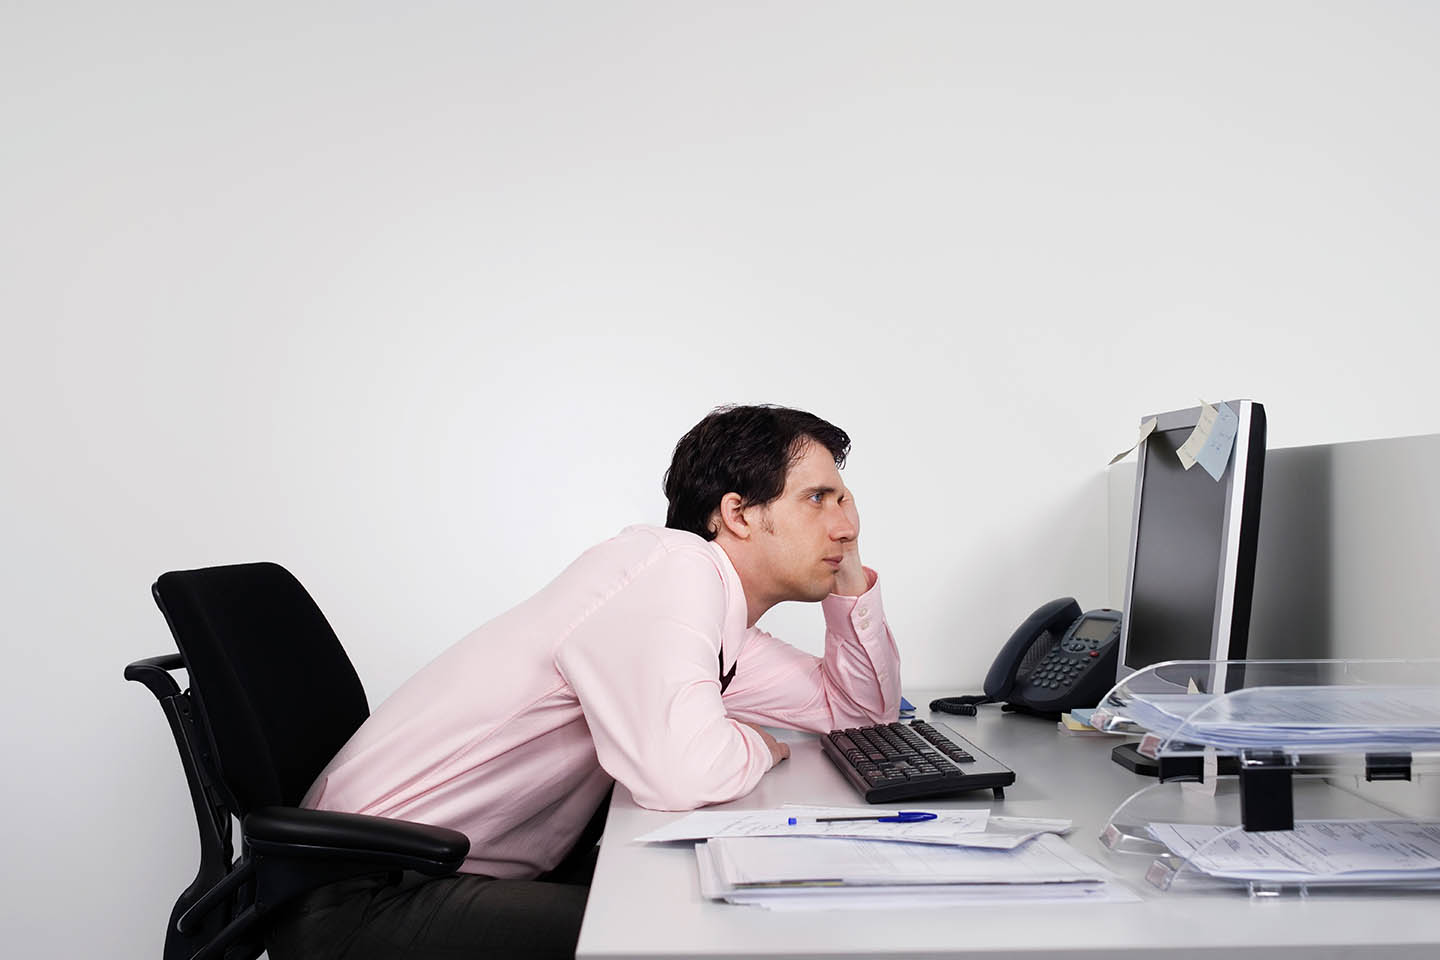 A bored looking man slouching at his desk